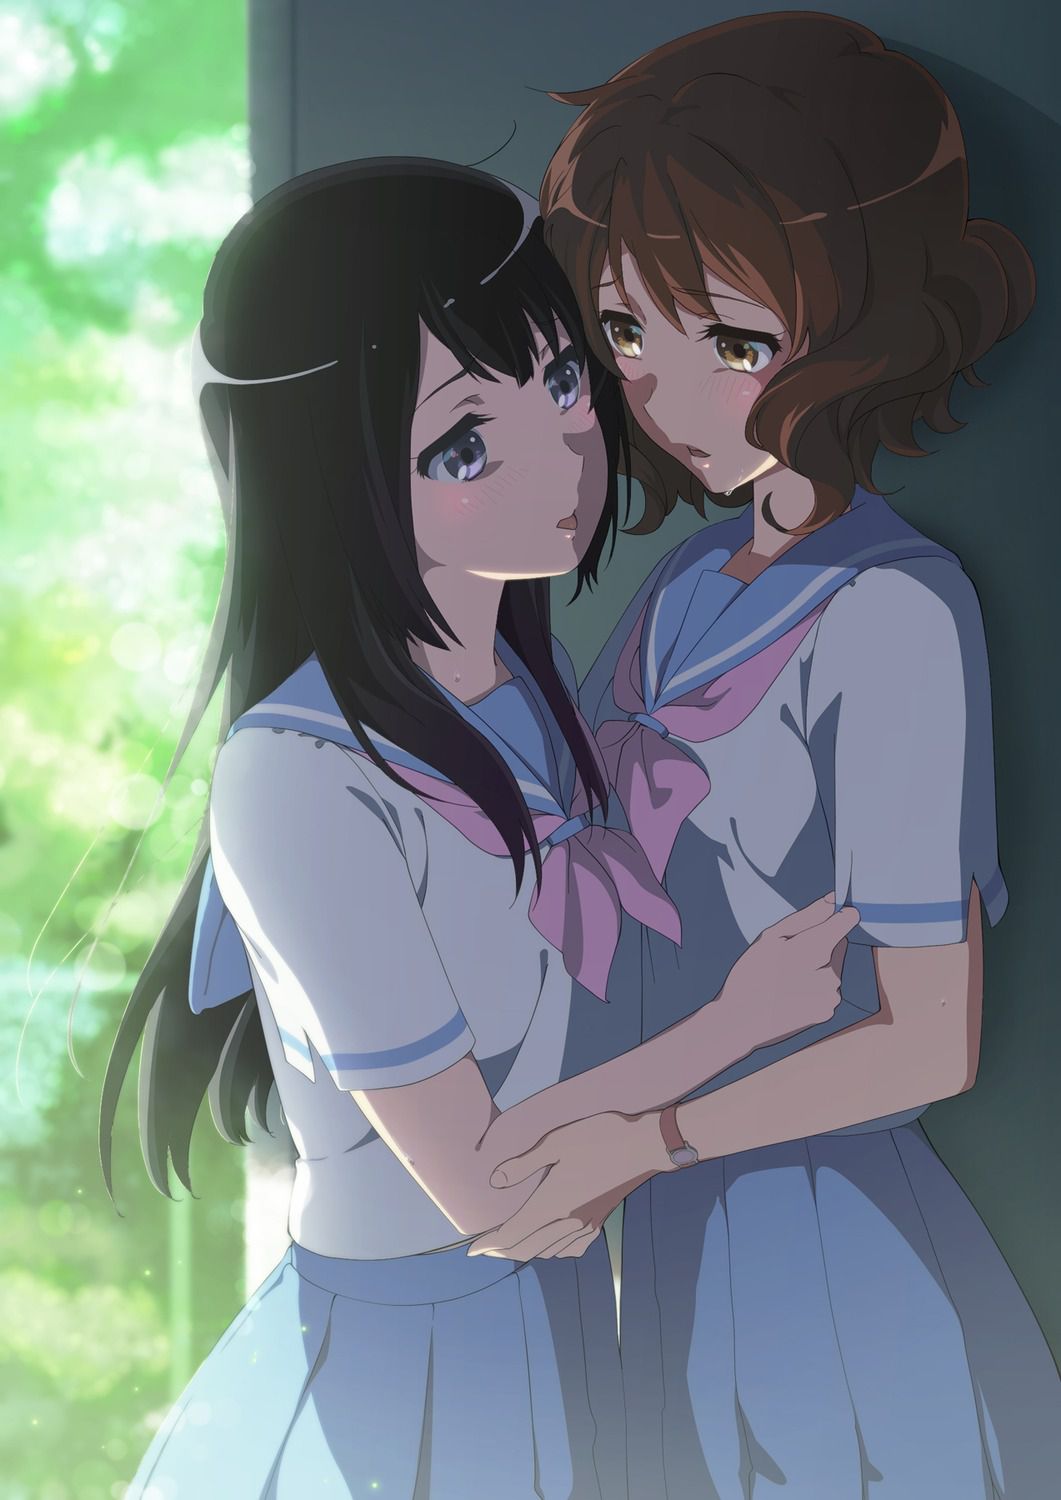 Yuri and Lesbian secondary image wwww to be naughty in girls each other 4 2